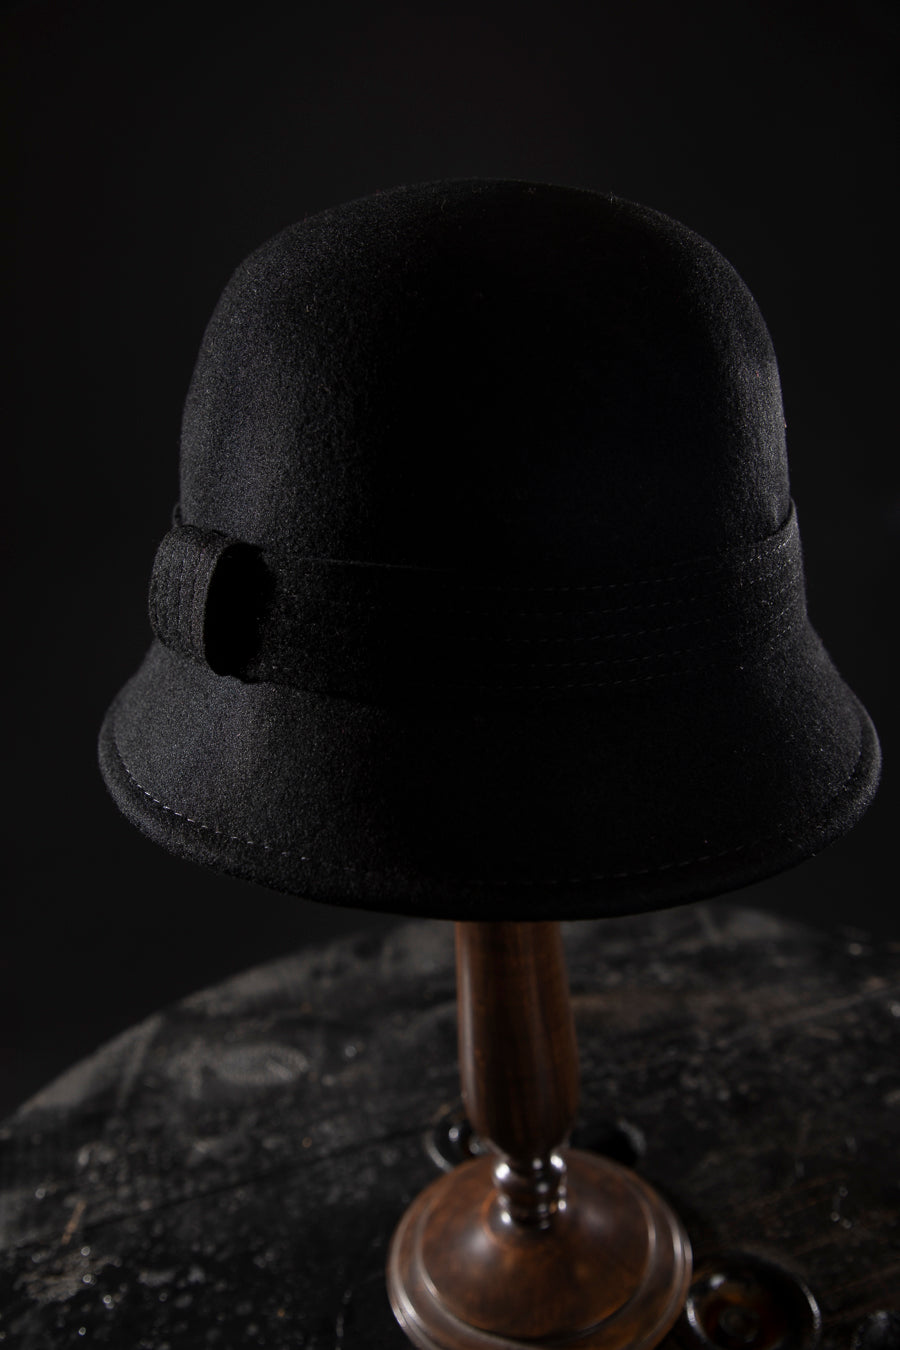 Wool Felt 1920s Cloche - Deluxe, high-quality hats for men and women. Our collection of hats including wool felt top hats, fedoras, bowlers, caps, fedoras, trilbys, cloches and more are a wonderful addition to a 1920s Gangster or Gatsby costume, or the perfect fashion accessory. Shop online, or visit our Mornington hat store to see all that we have to offer.